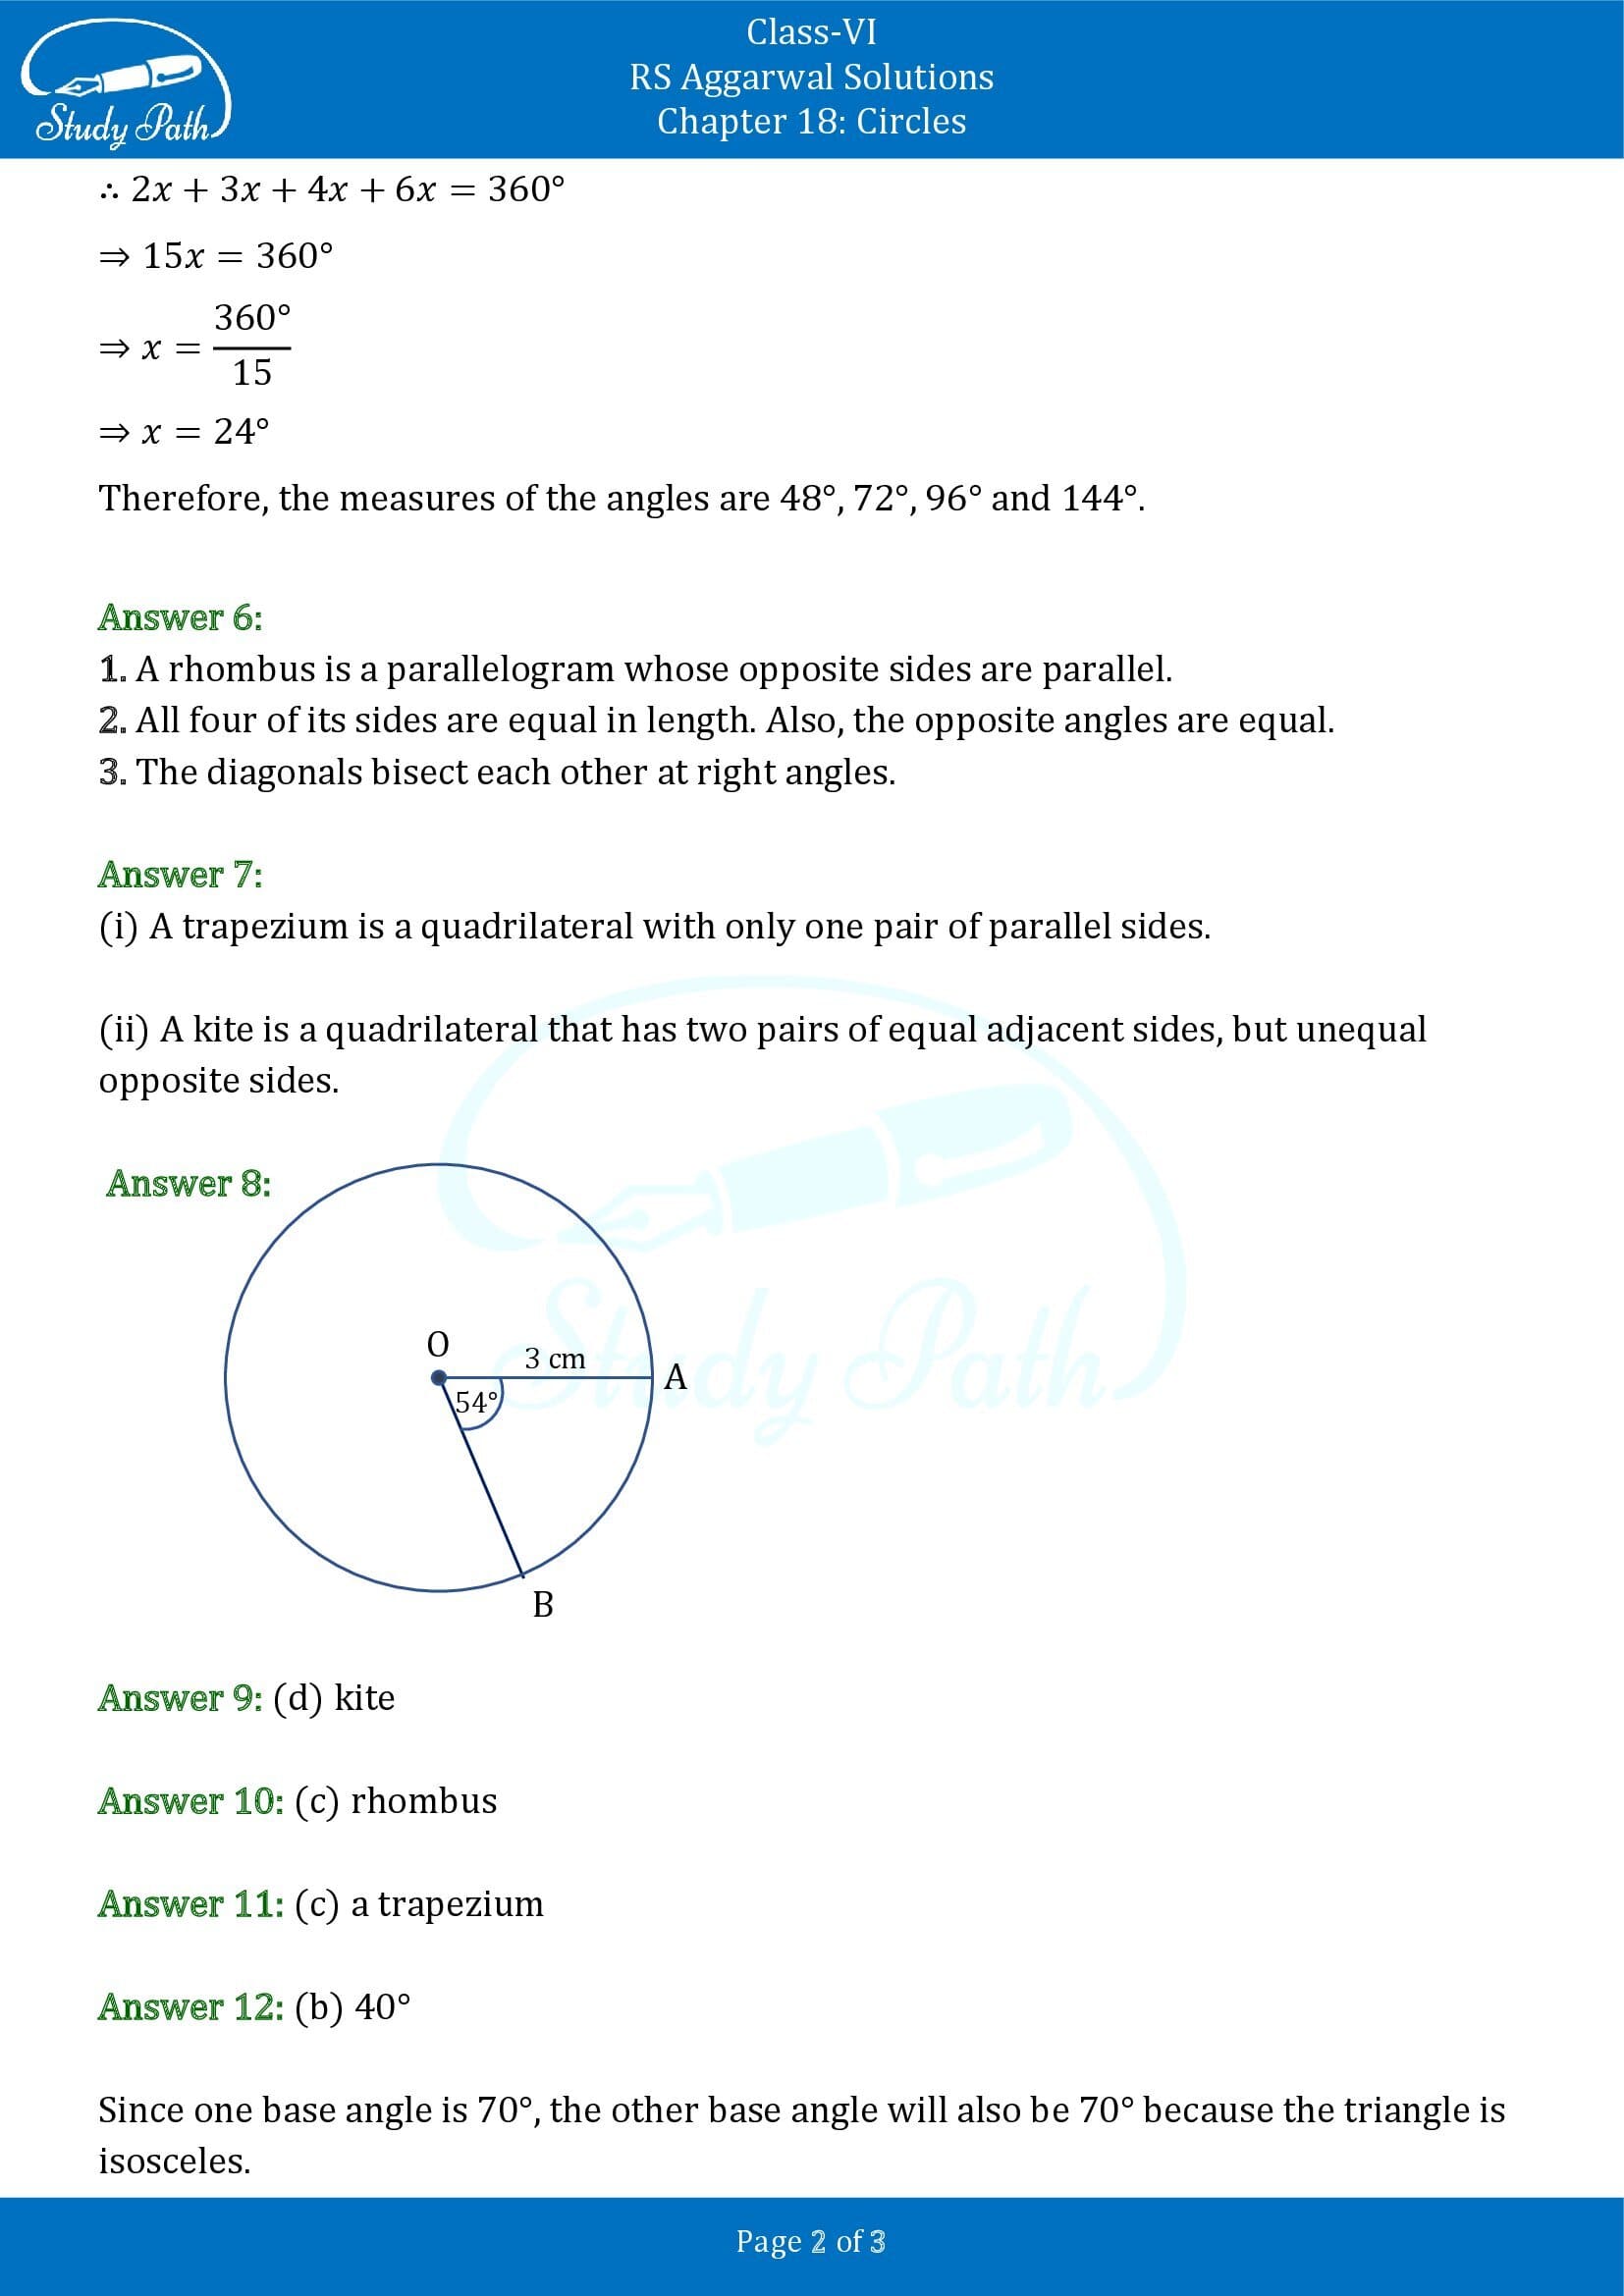 RS Aggarwal Solutions Class 6 Chapter 18 Circles Test Paper 0002